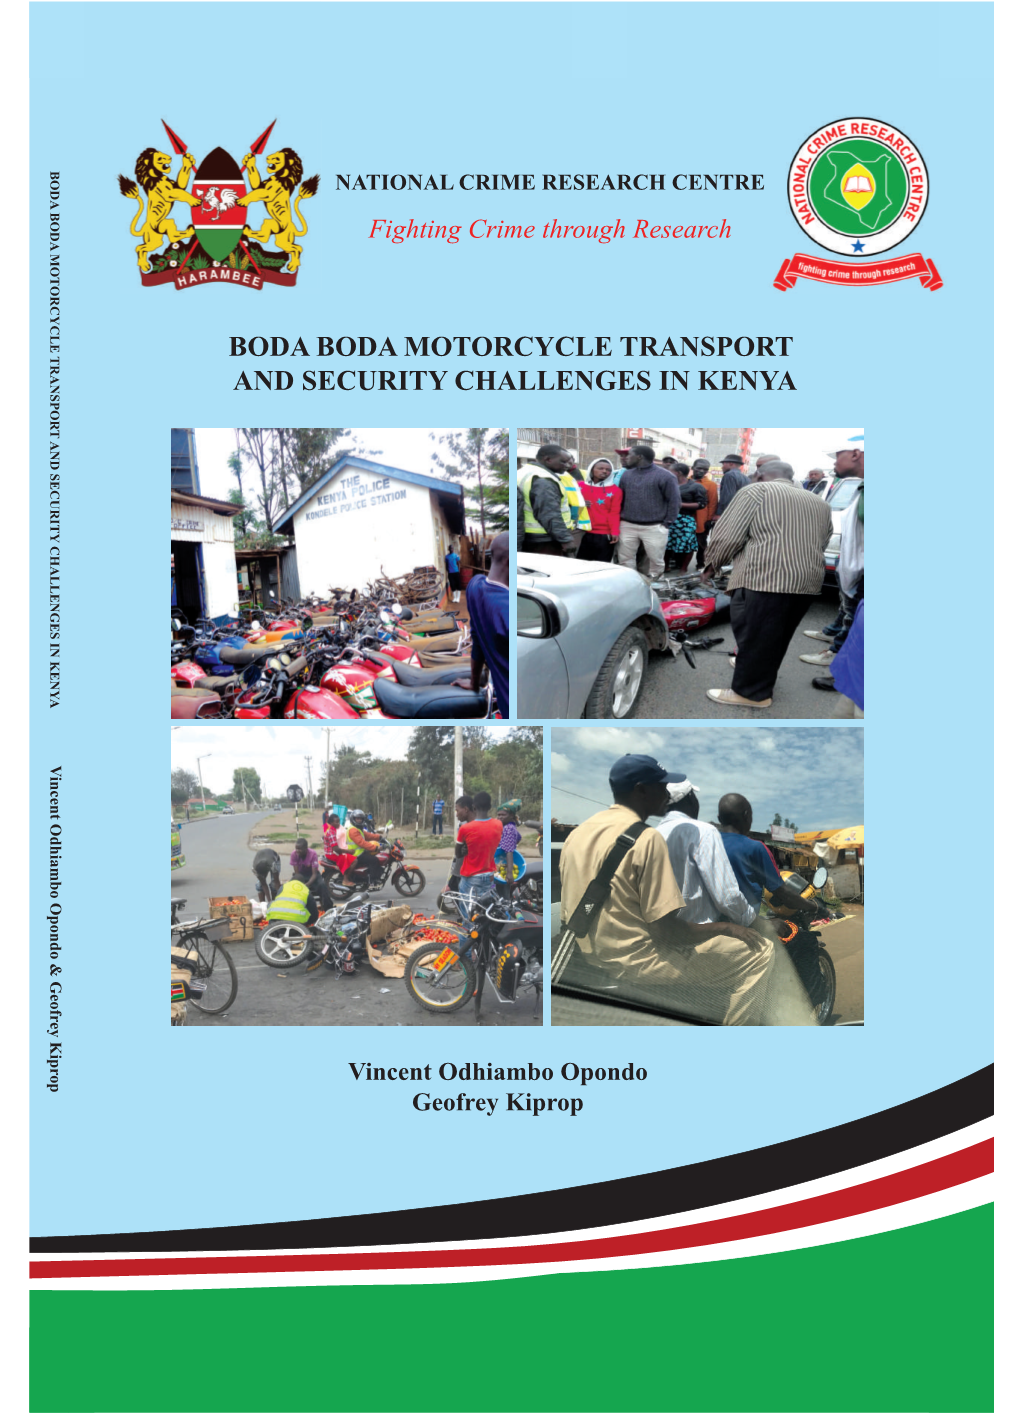 BODA BODA MOTORCYCLE TRANSPORT and SECURITY CHALLENGES in KENYA NATIONAL CRIME RESEARCH CENTRE Fighting Crime Through Research